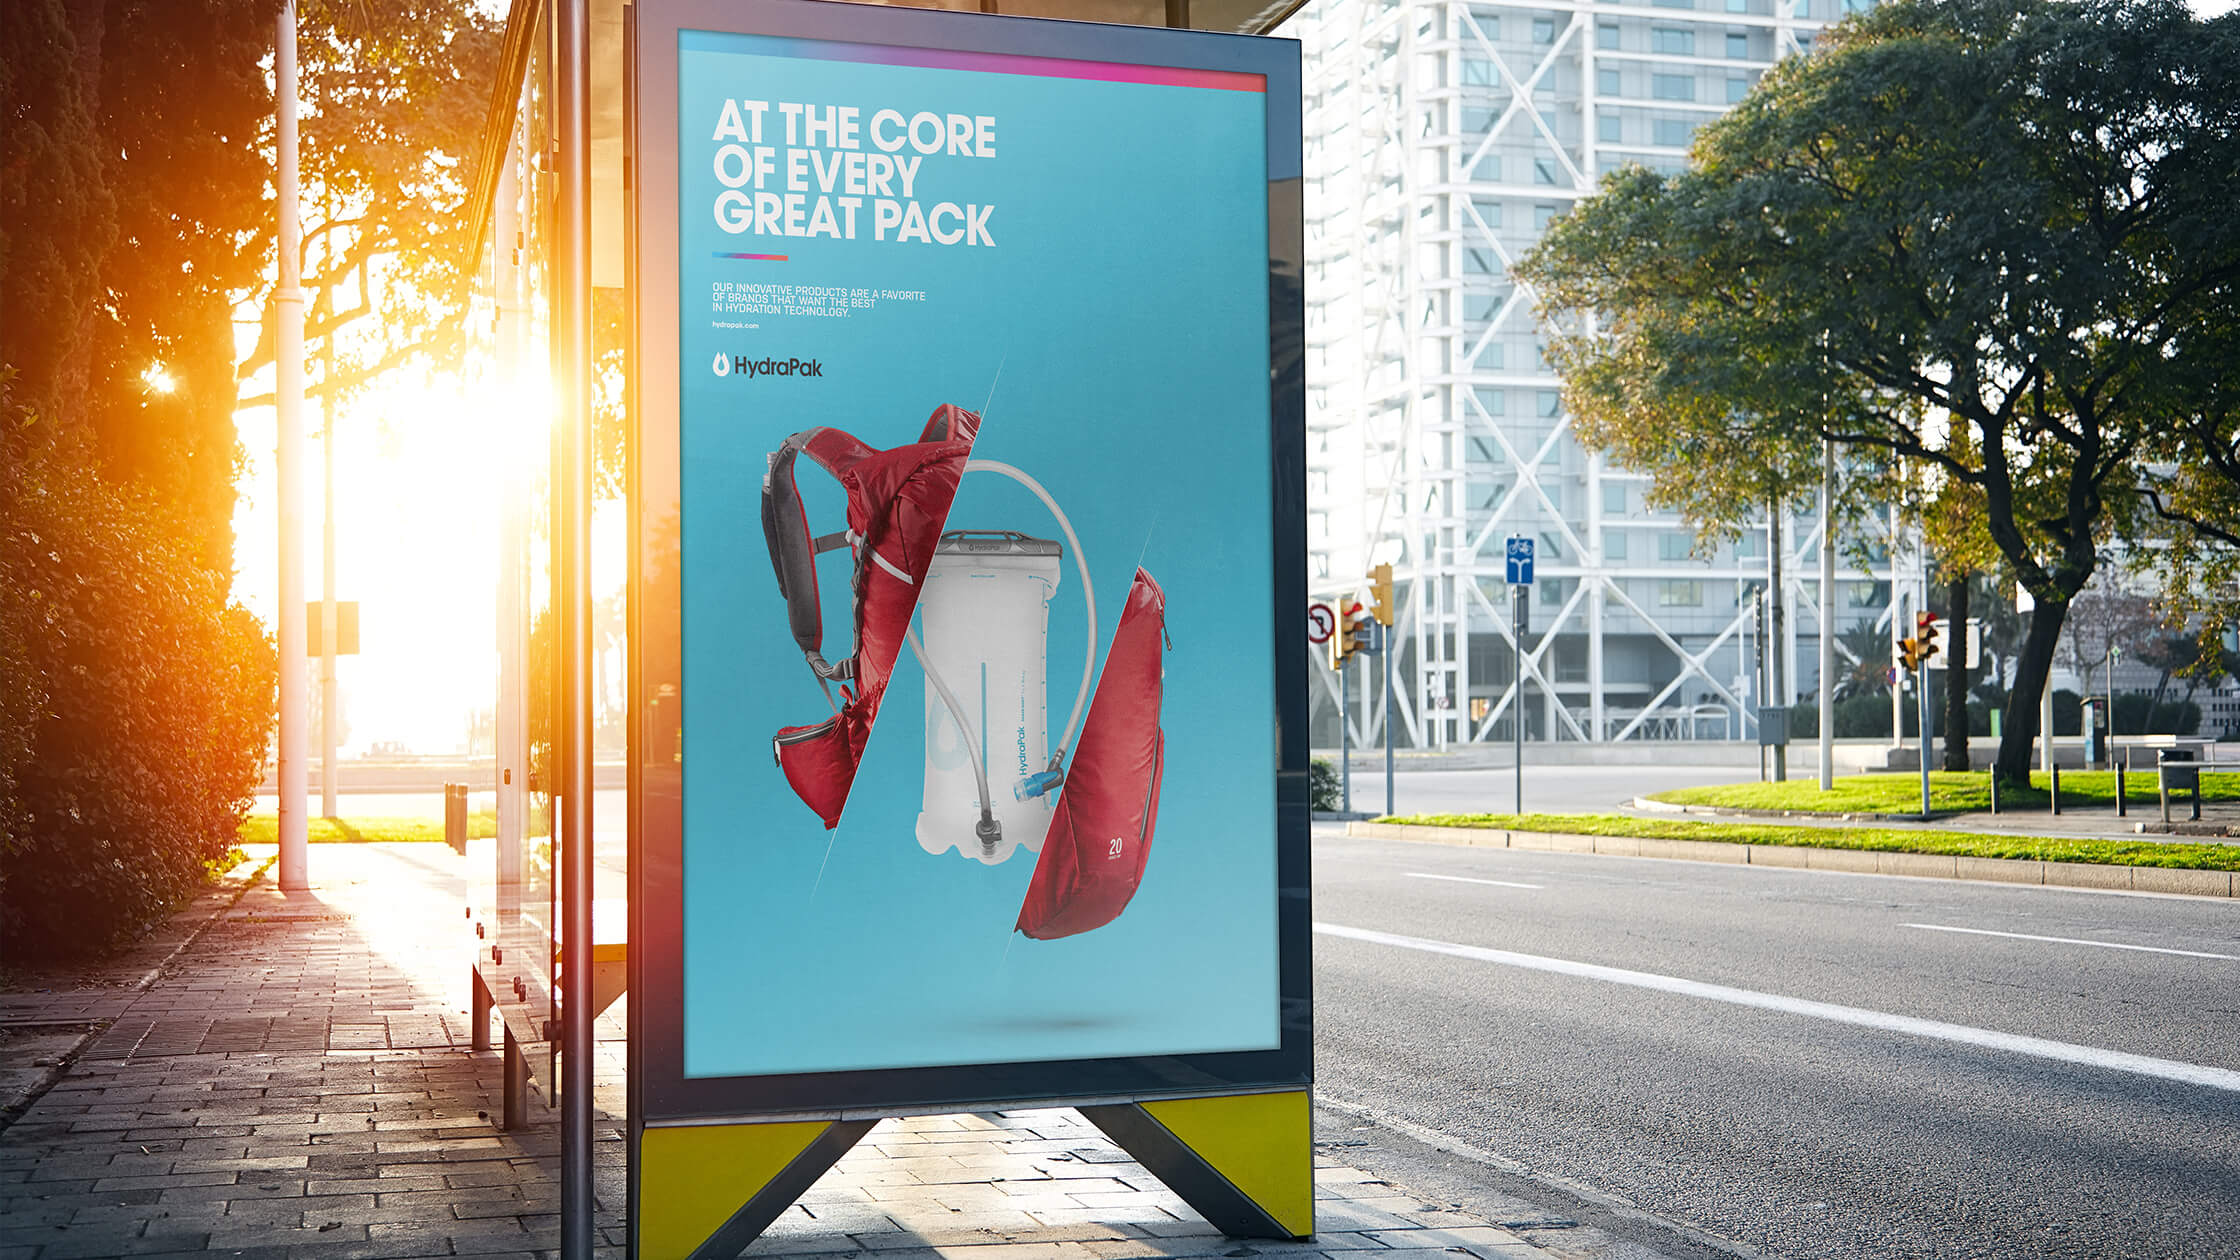 brand partner advertising campaign with hydrapak at the core of every great pack